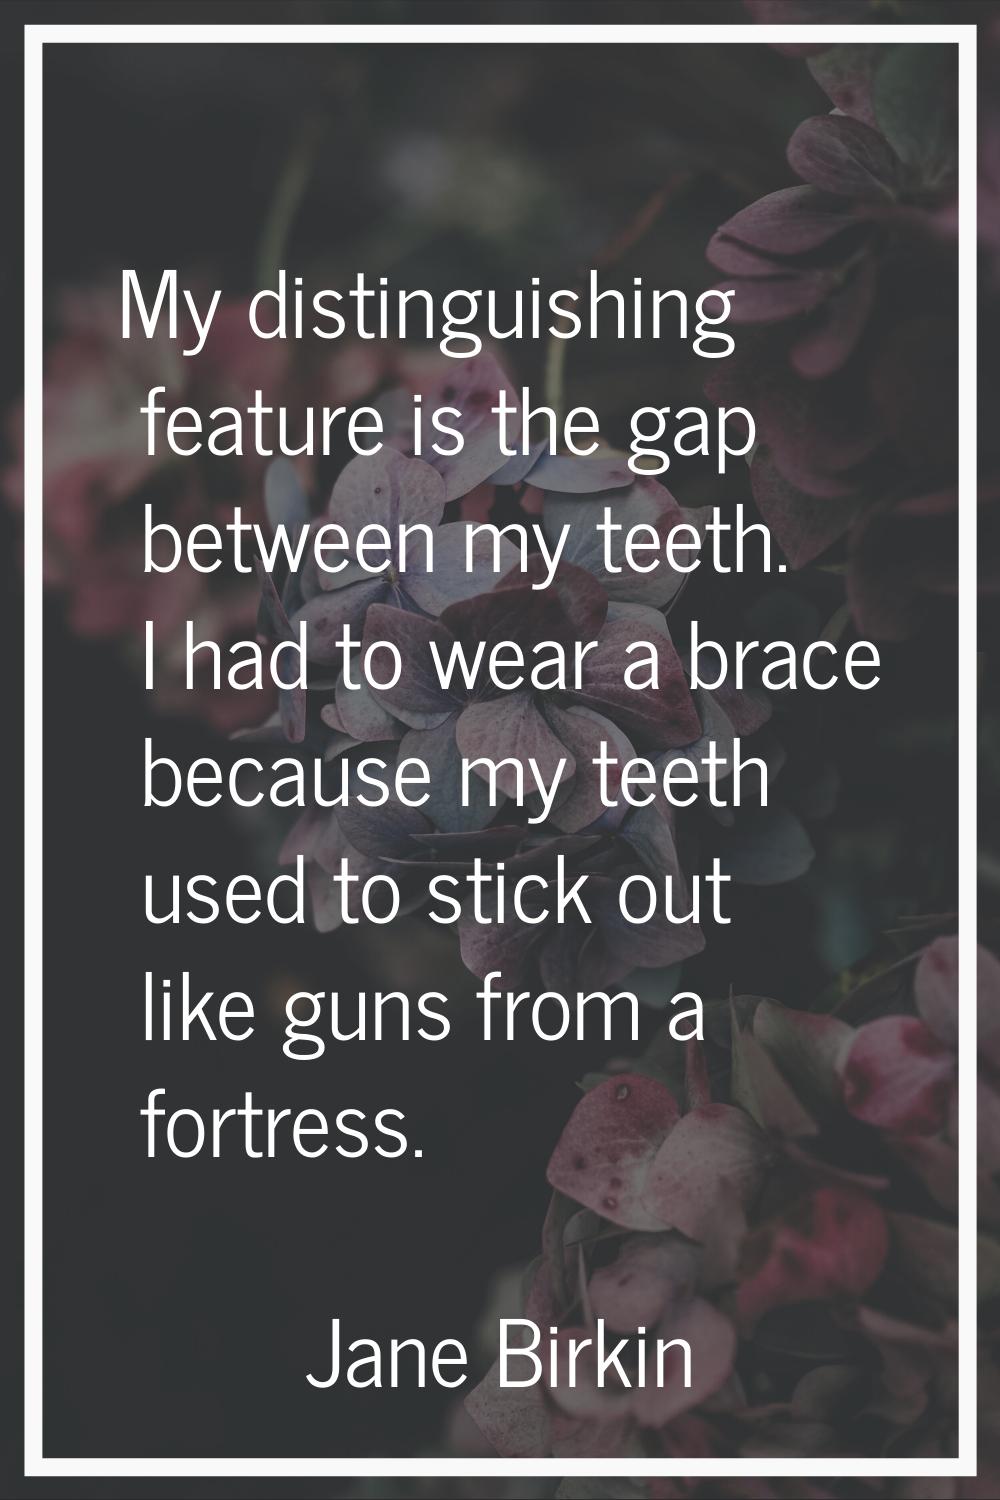 My distinguishing feature is the gap between my teeth. I had to wear a brace because my teeth used 